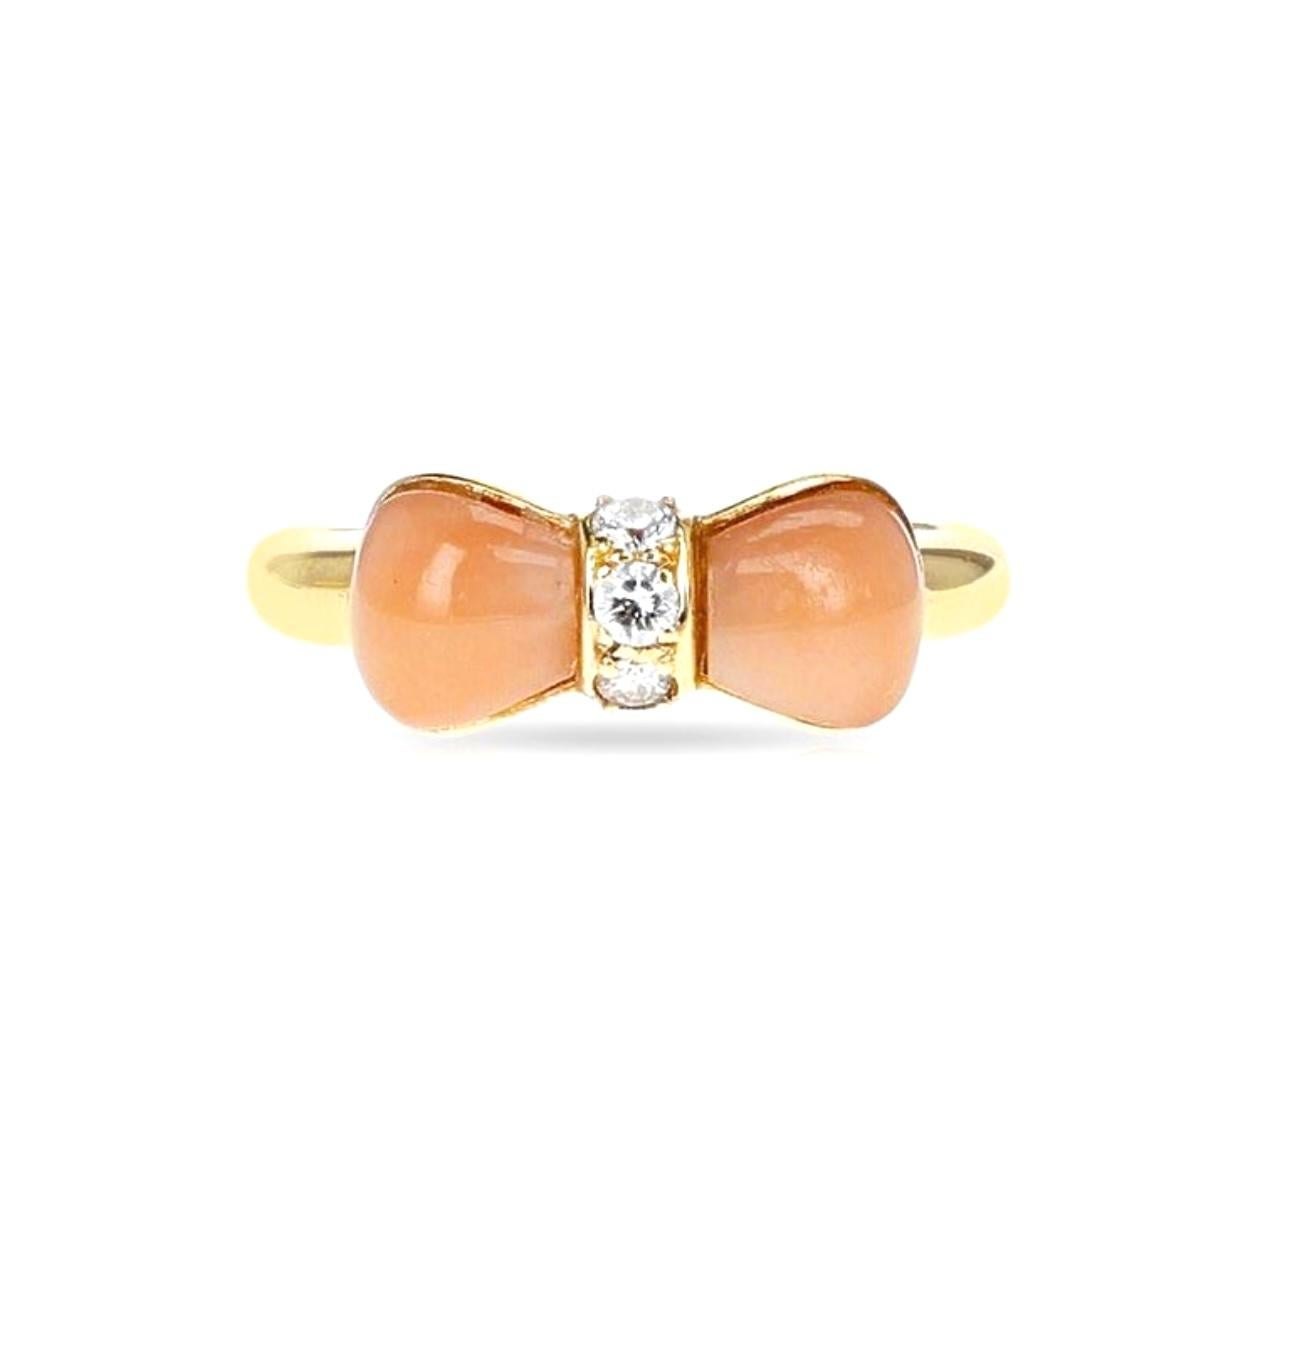 Van Cleef & Arpels Coral Diamond 18k Yellow Gold Bow Design Ring For Sale 3